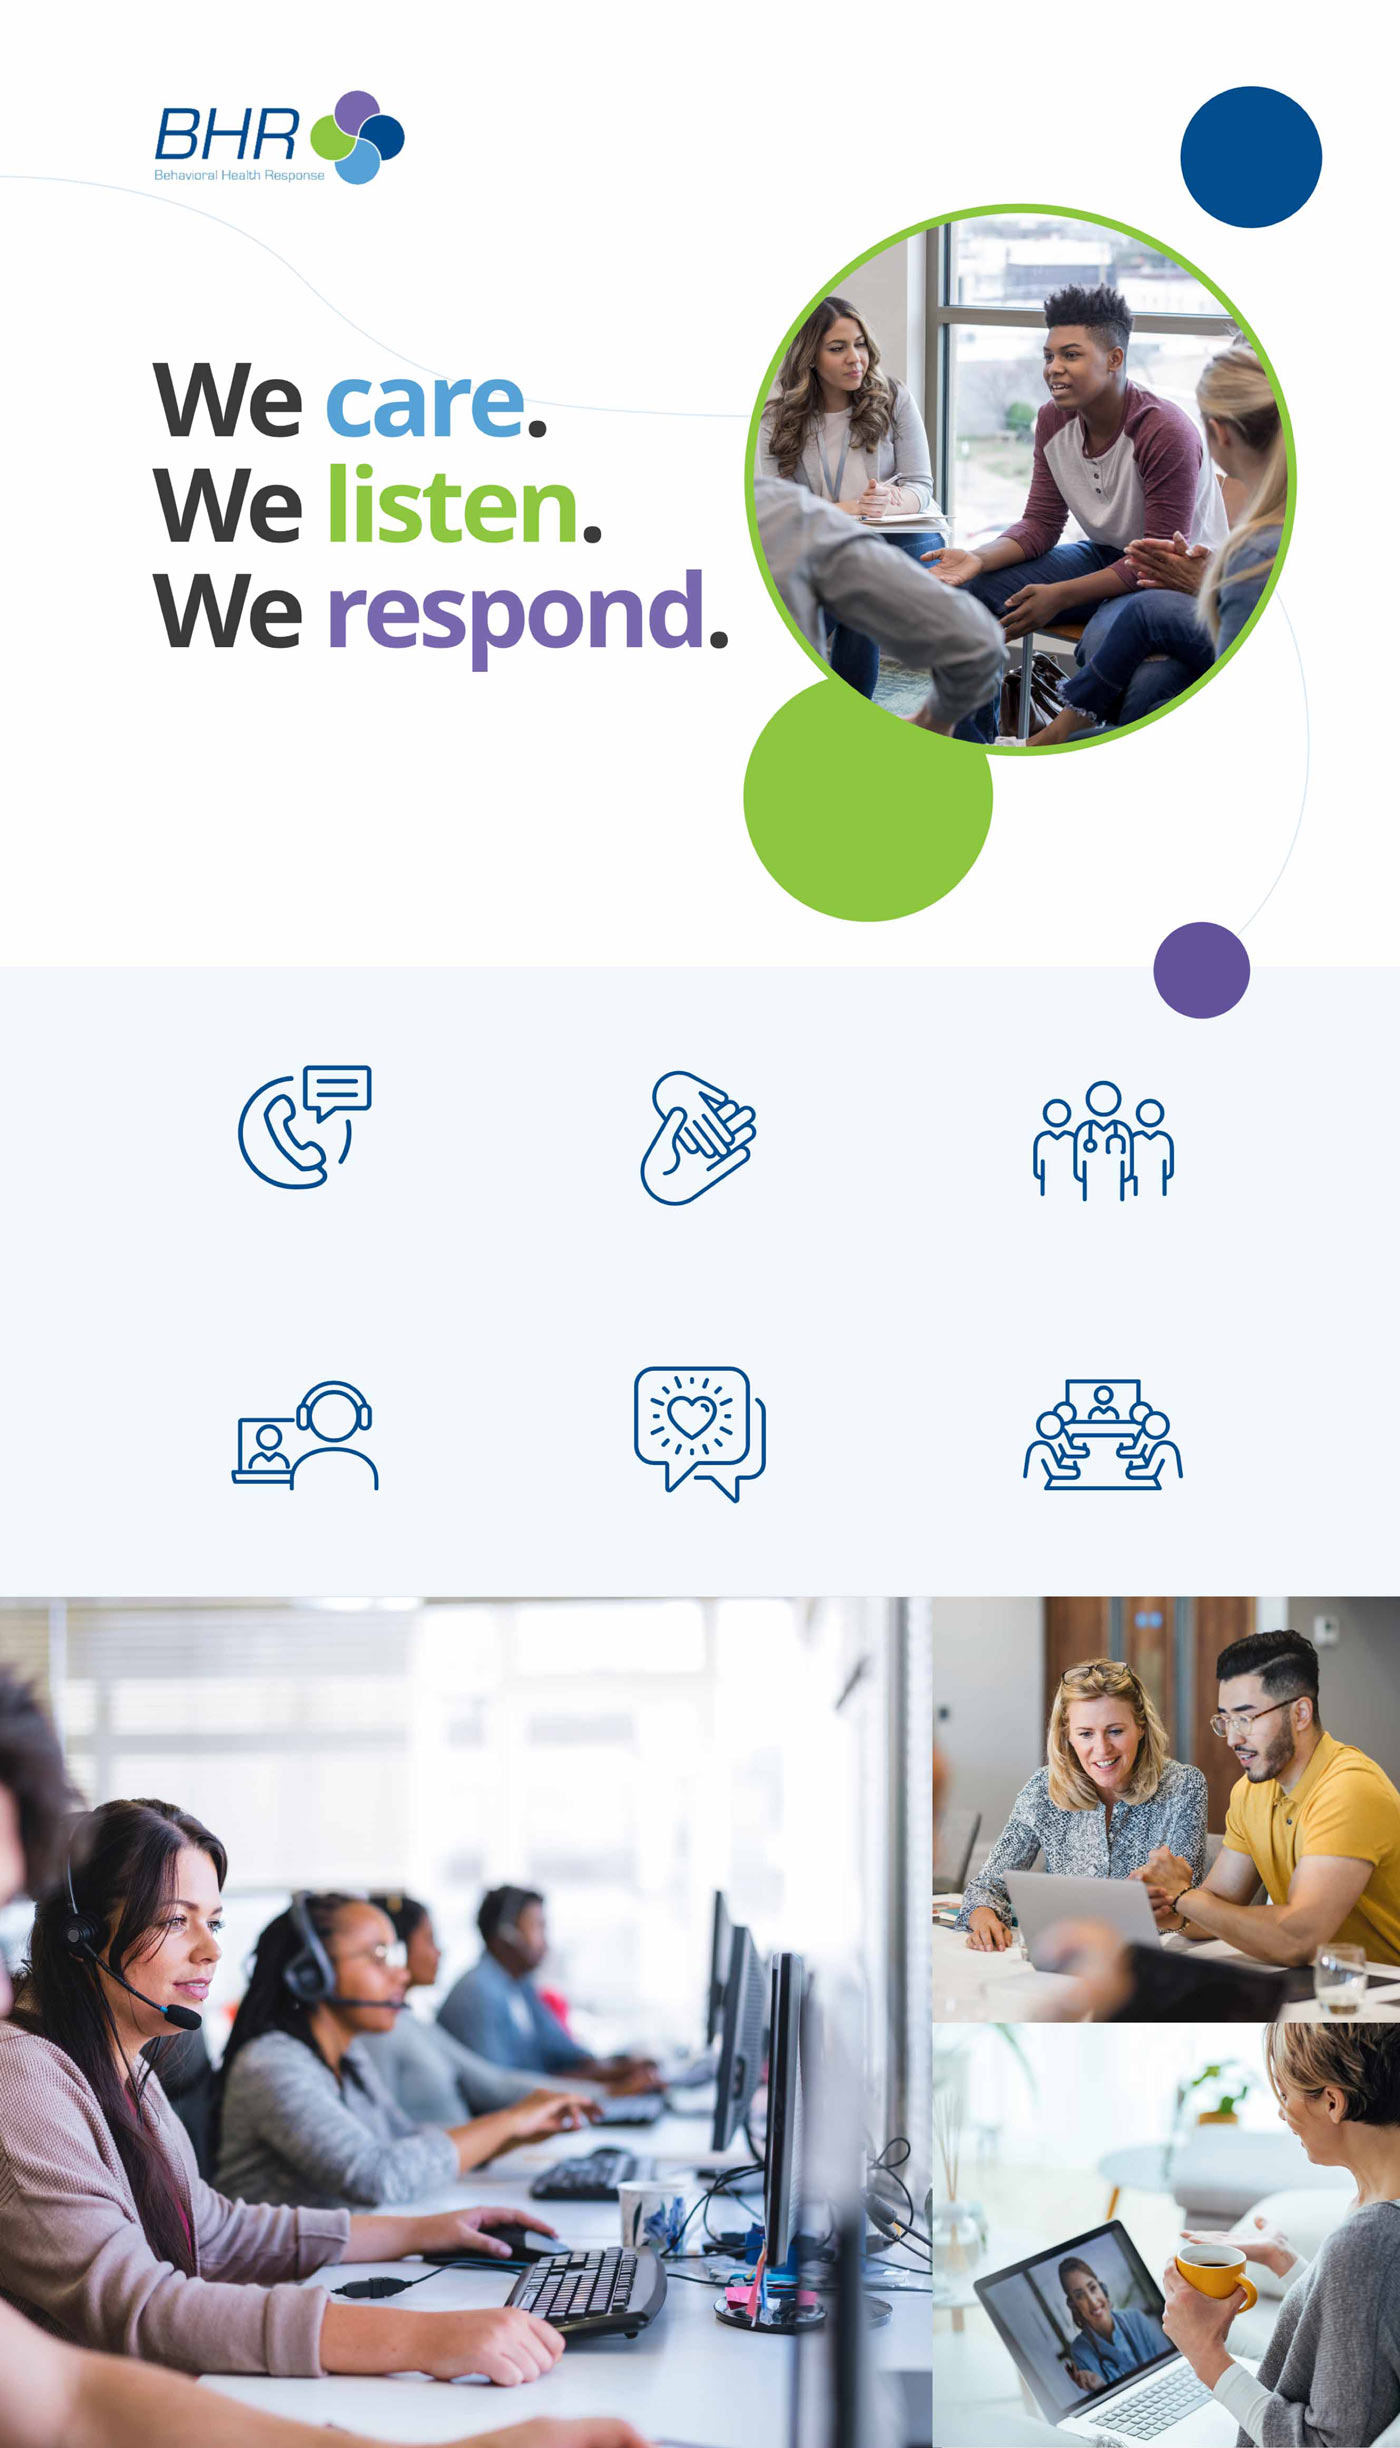 Elements of Behavioral Health Response's brand identity with icons and photography for the website design